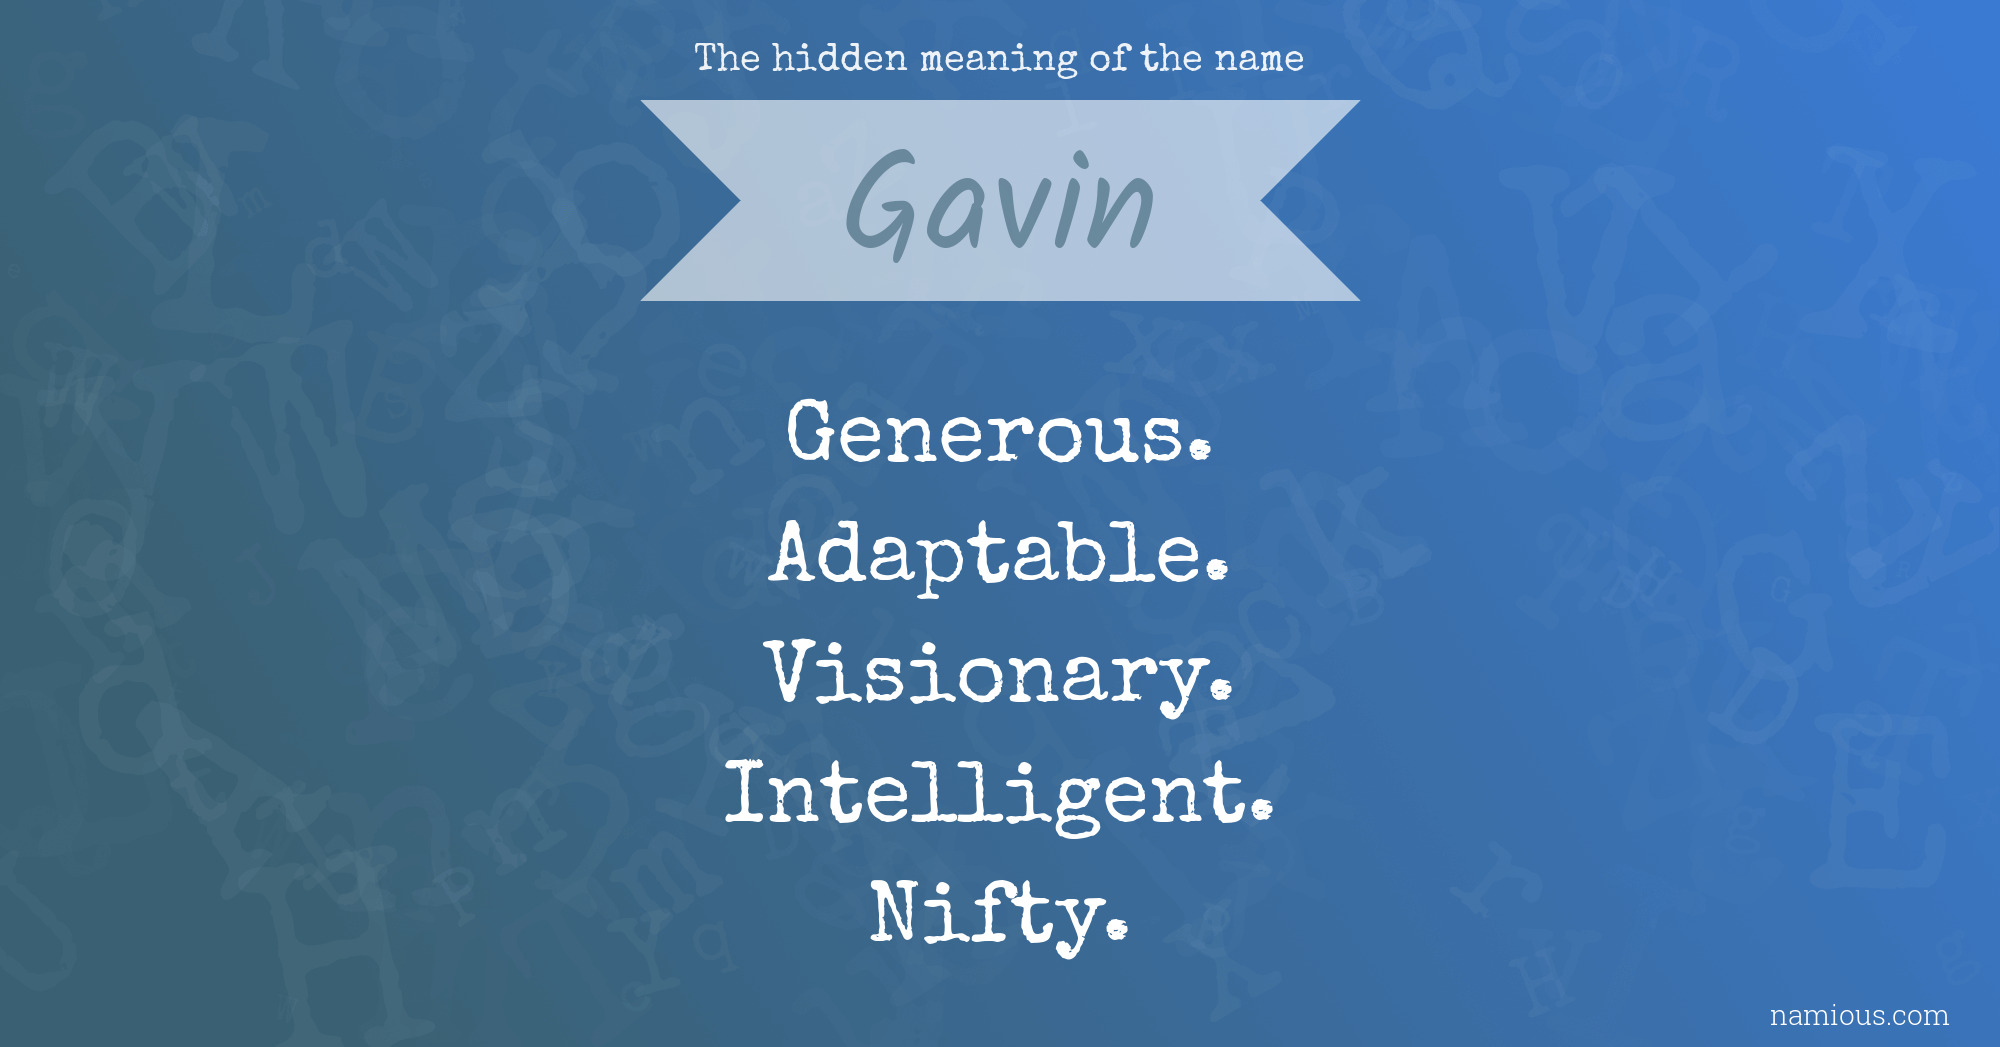 The hidden meaning of the name Gavin | Namious